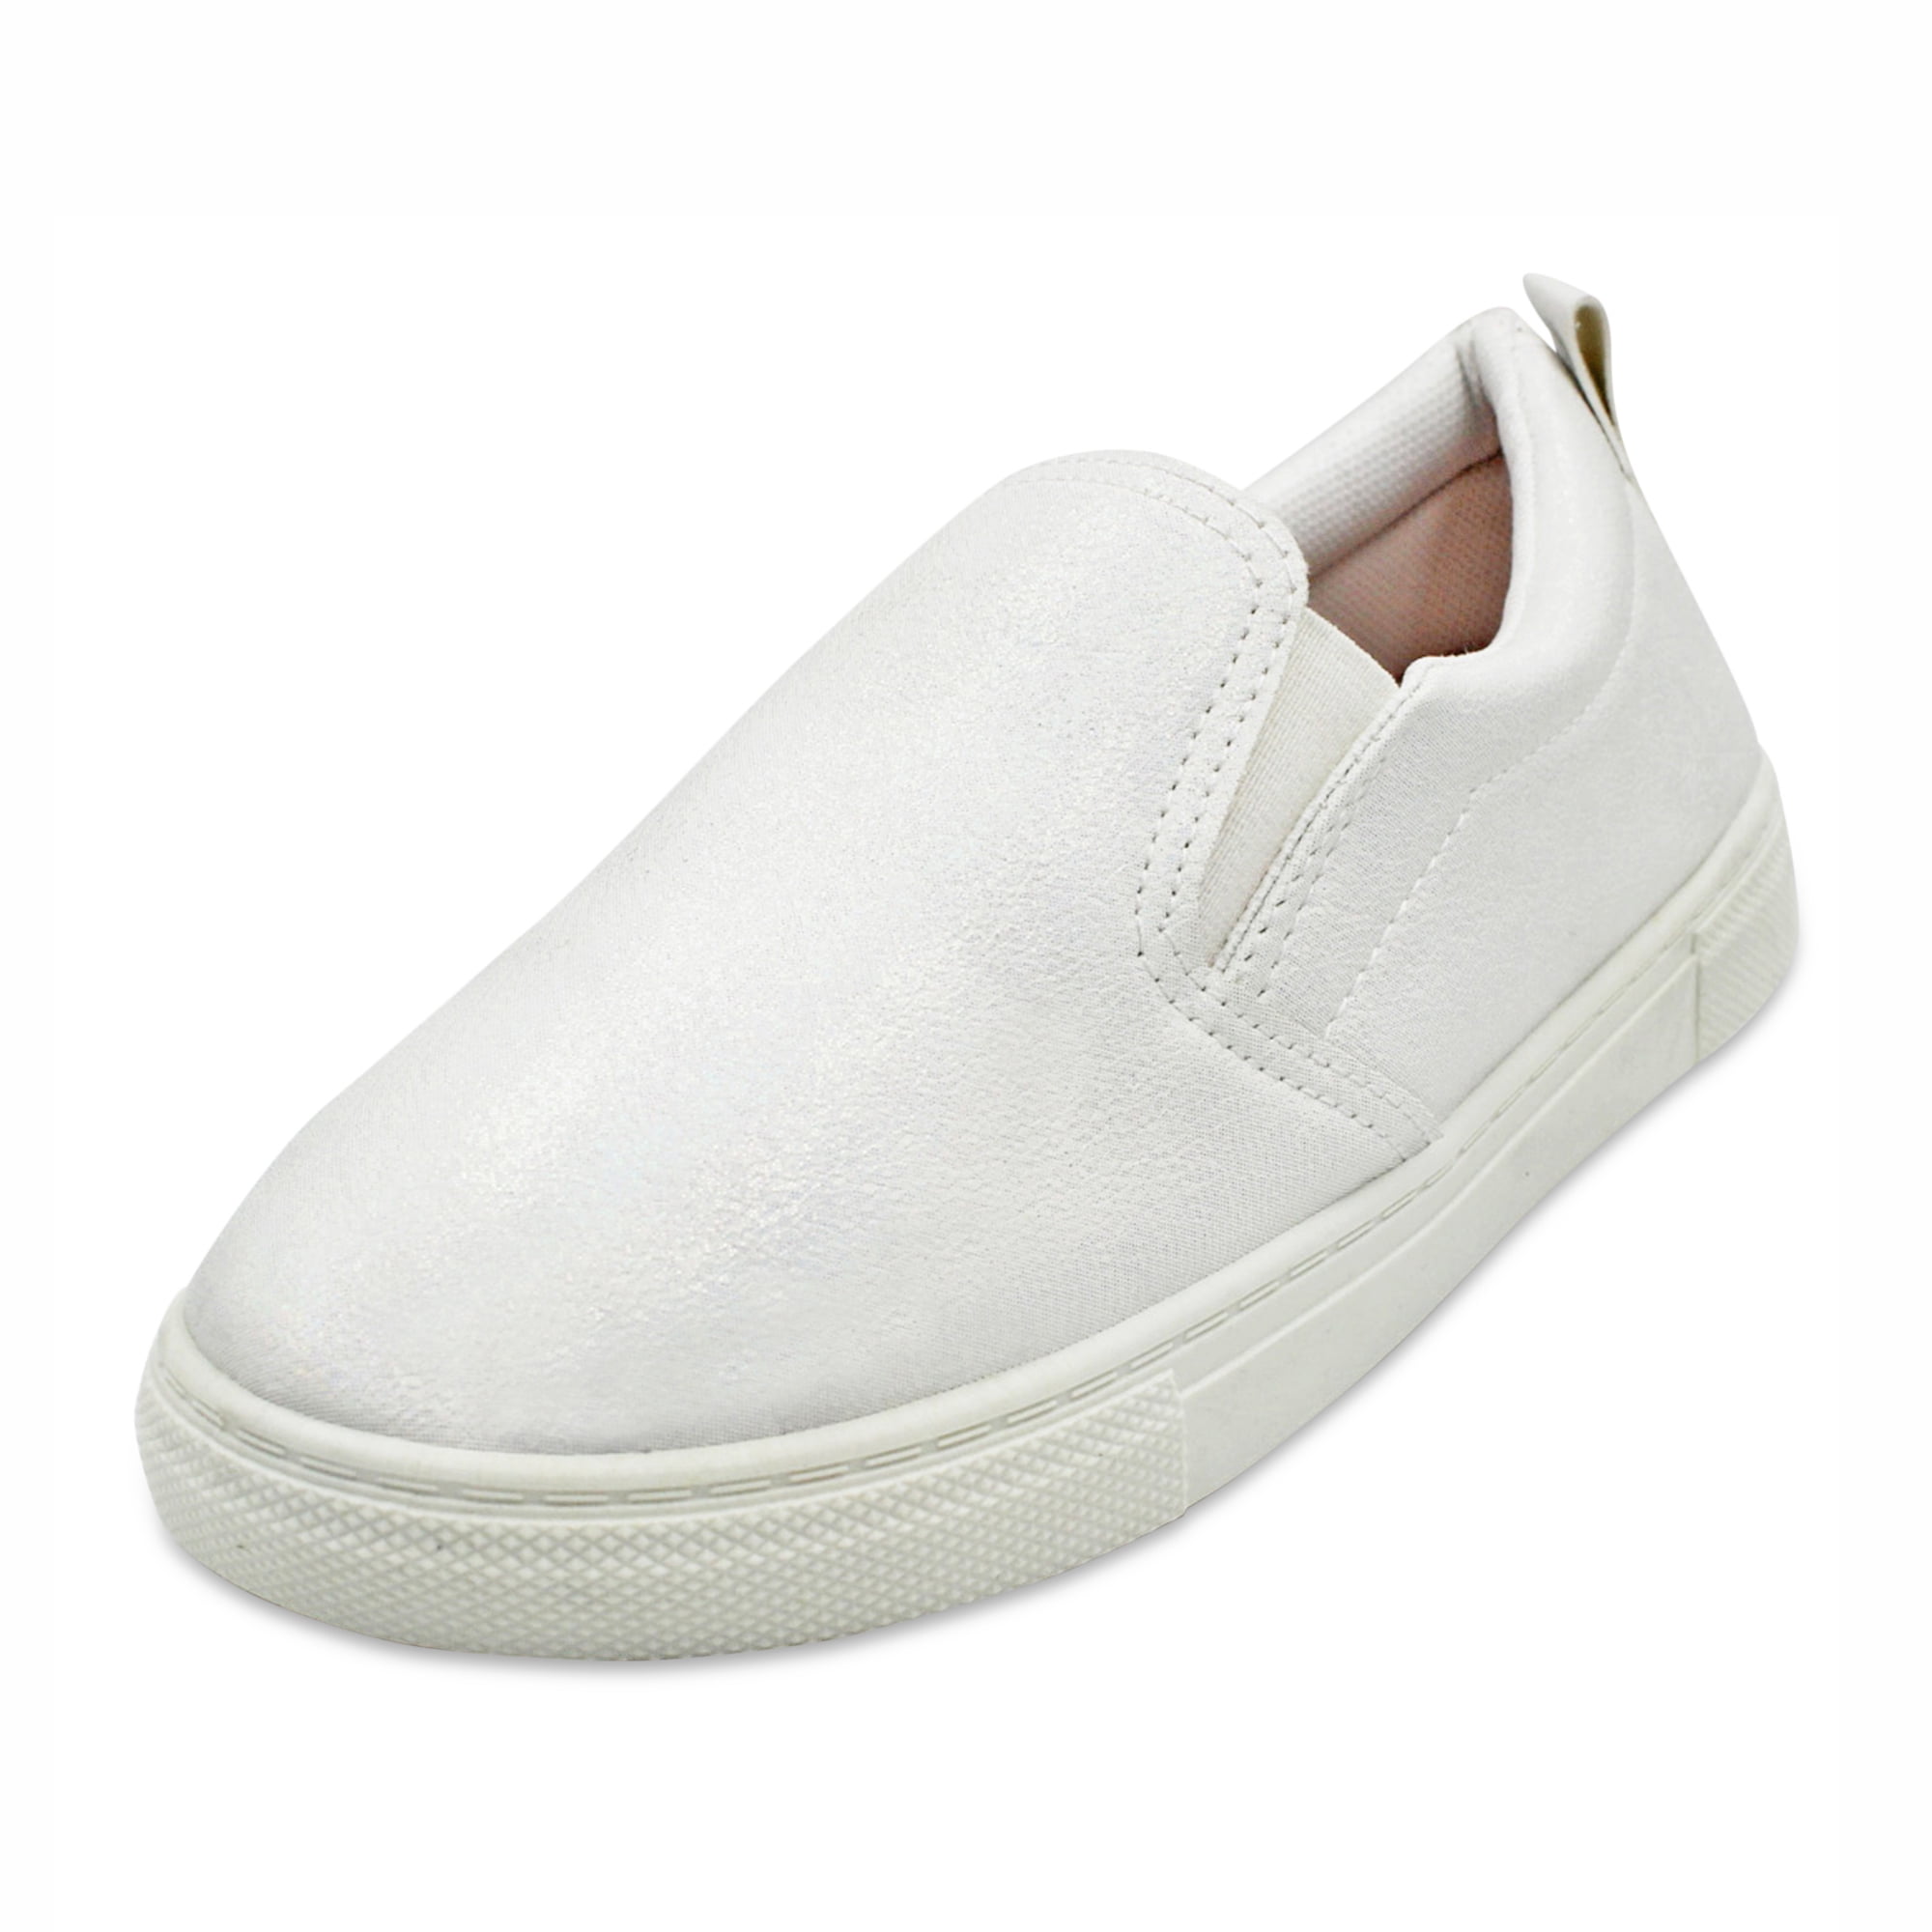 slip on canvas tennis shoes